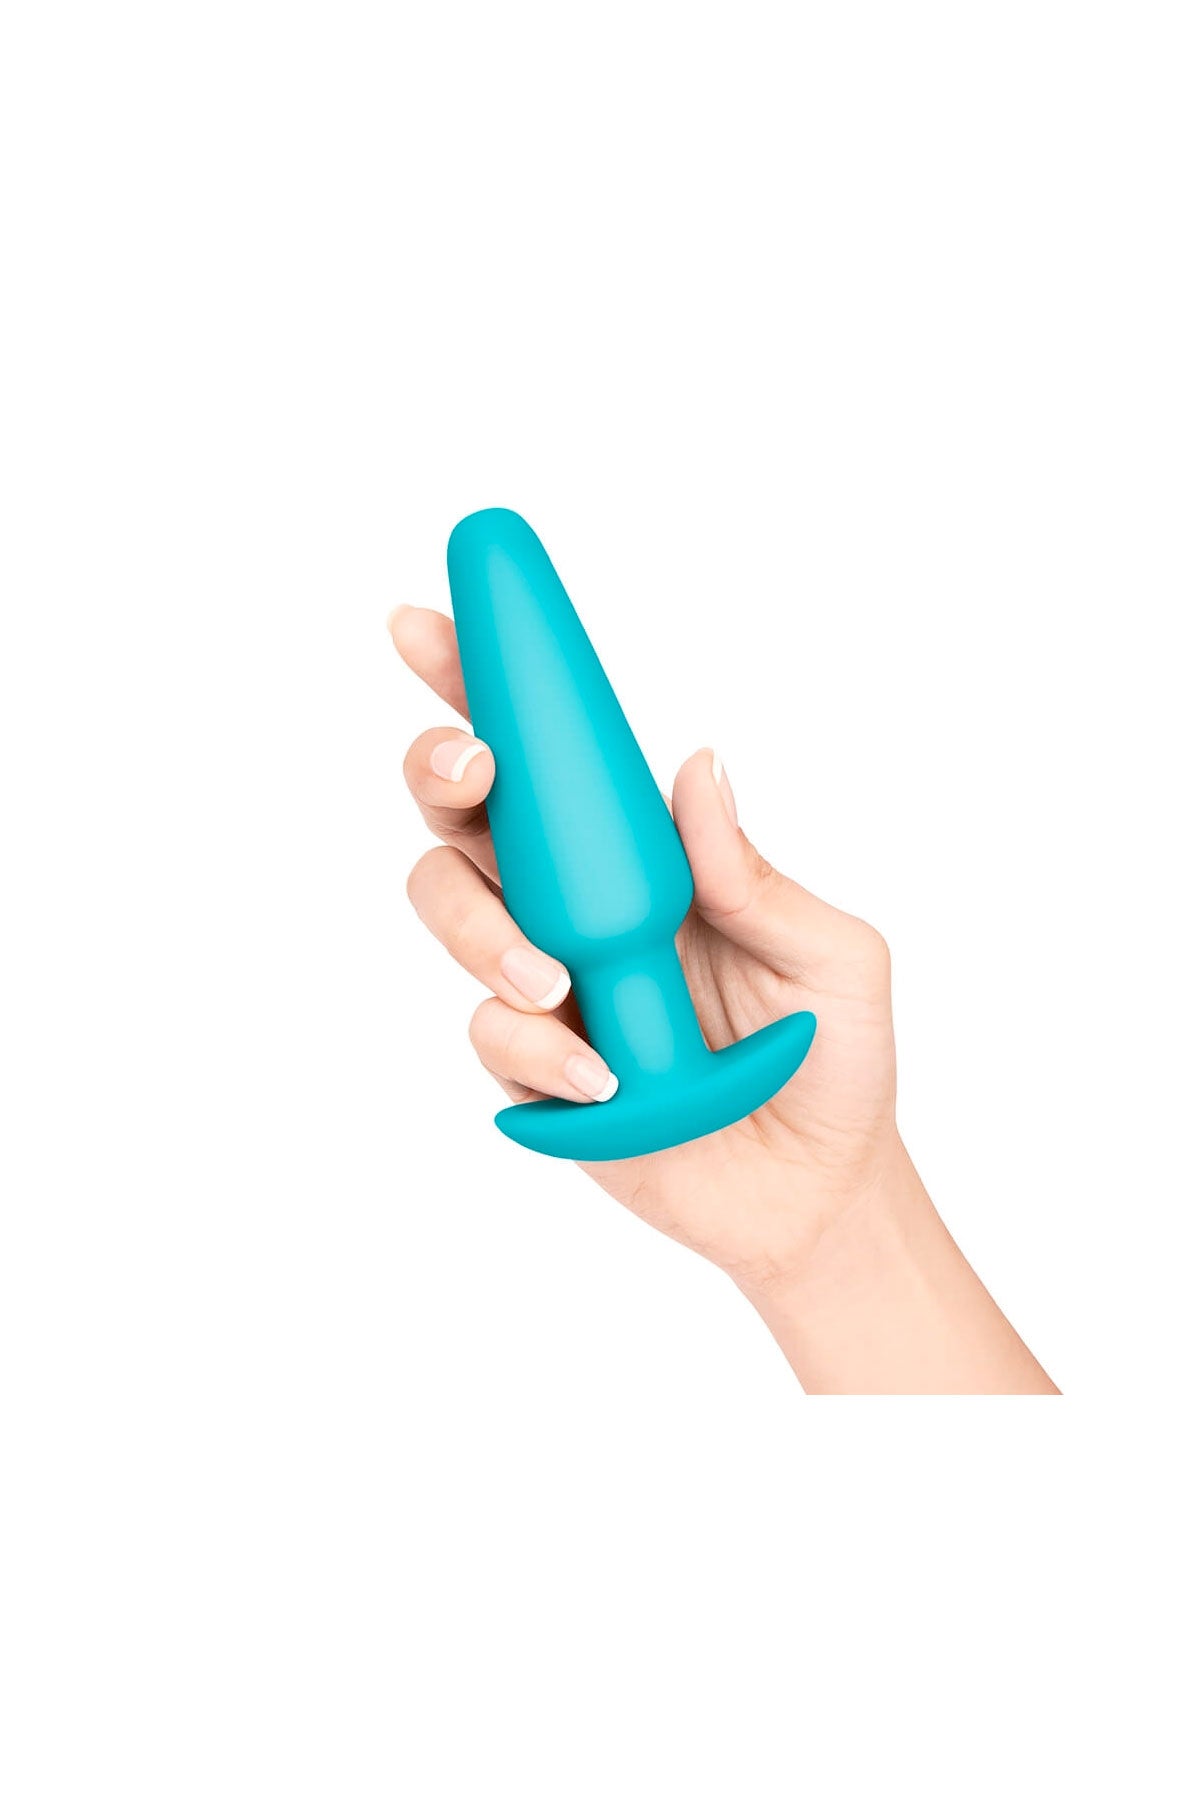 Training Kit Anal Sex Toy by B-Vibe Size 3